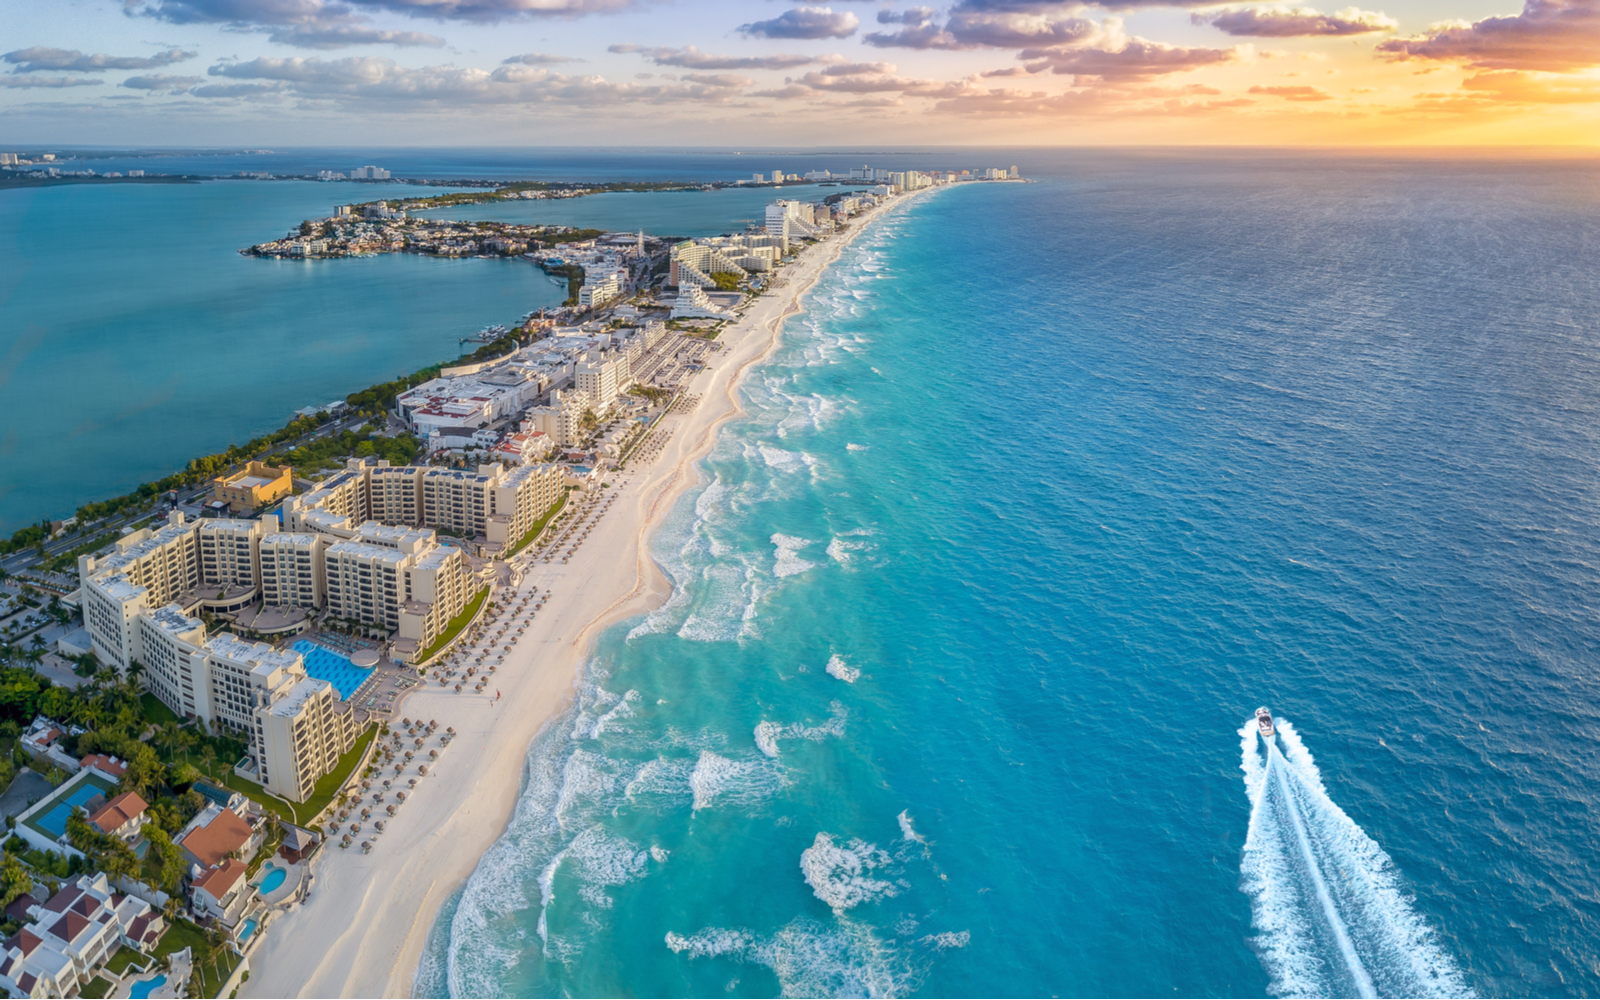 15 Best Things to Do in Cancun in 2023